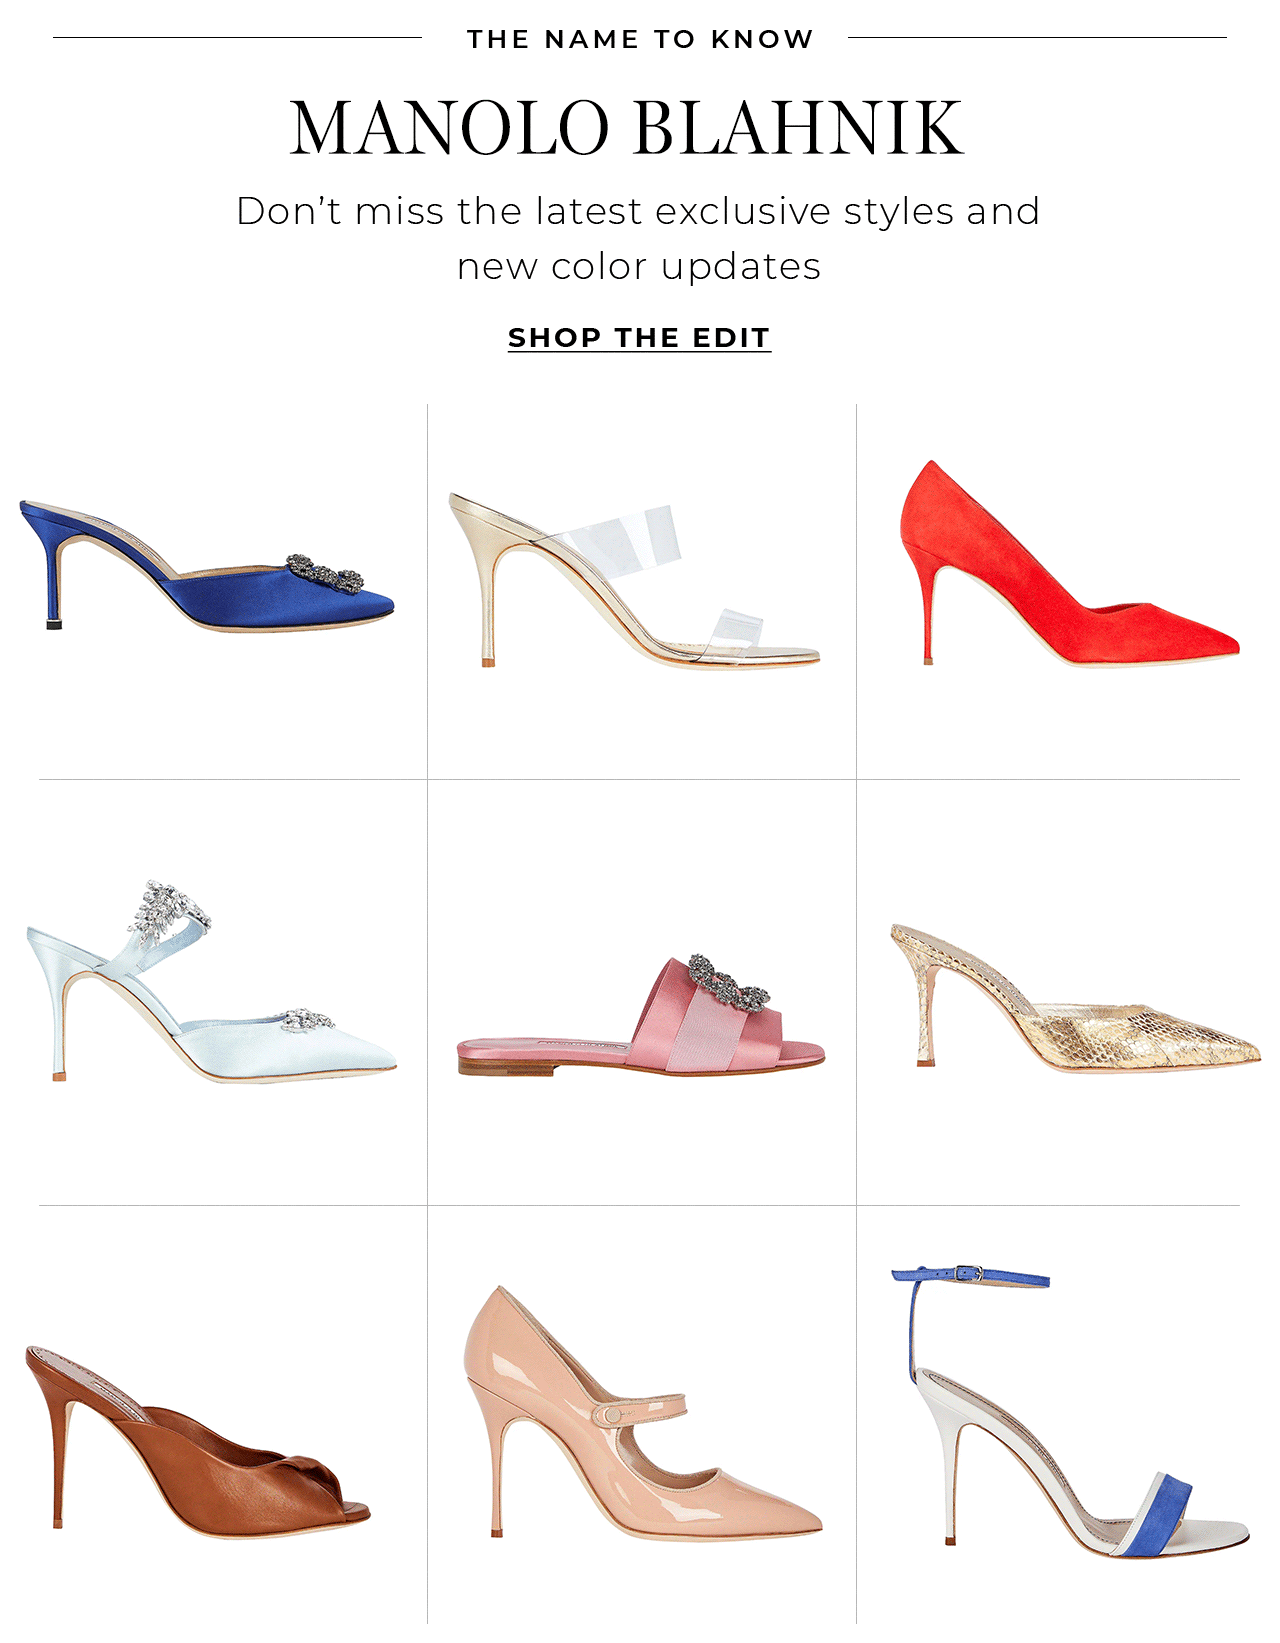 Don't miss the latest exclusive styles from Manolo Blahnik